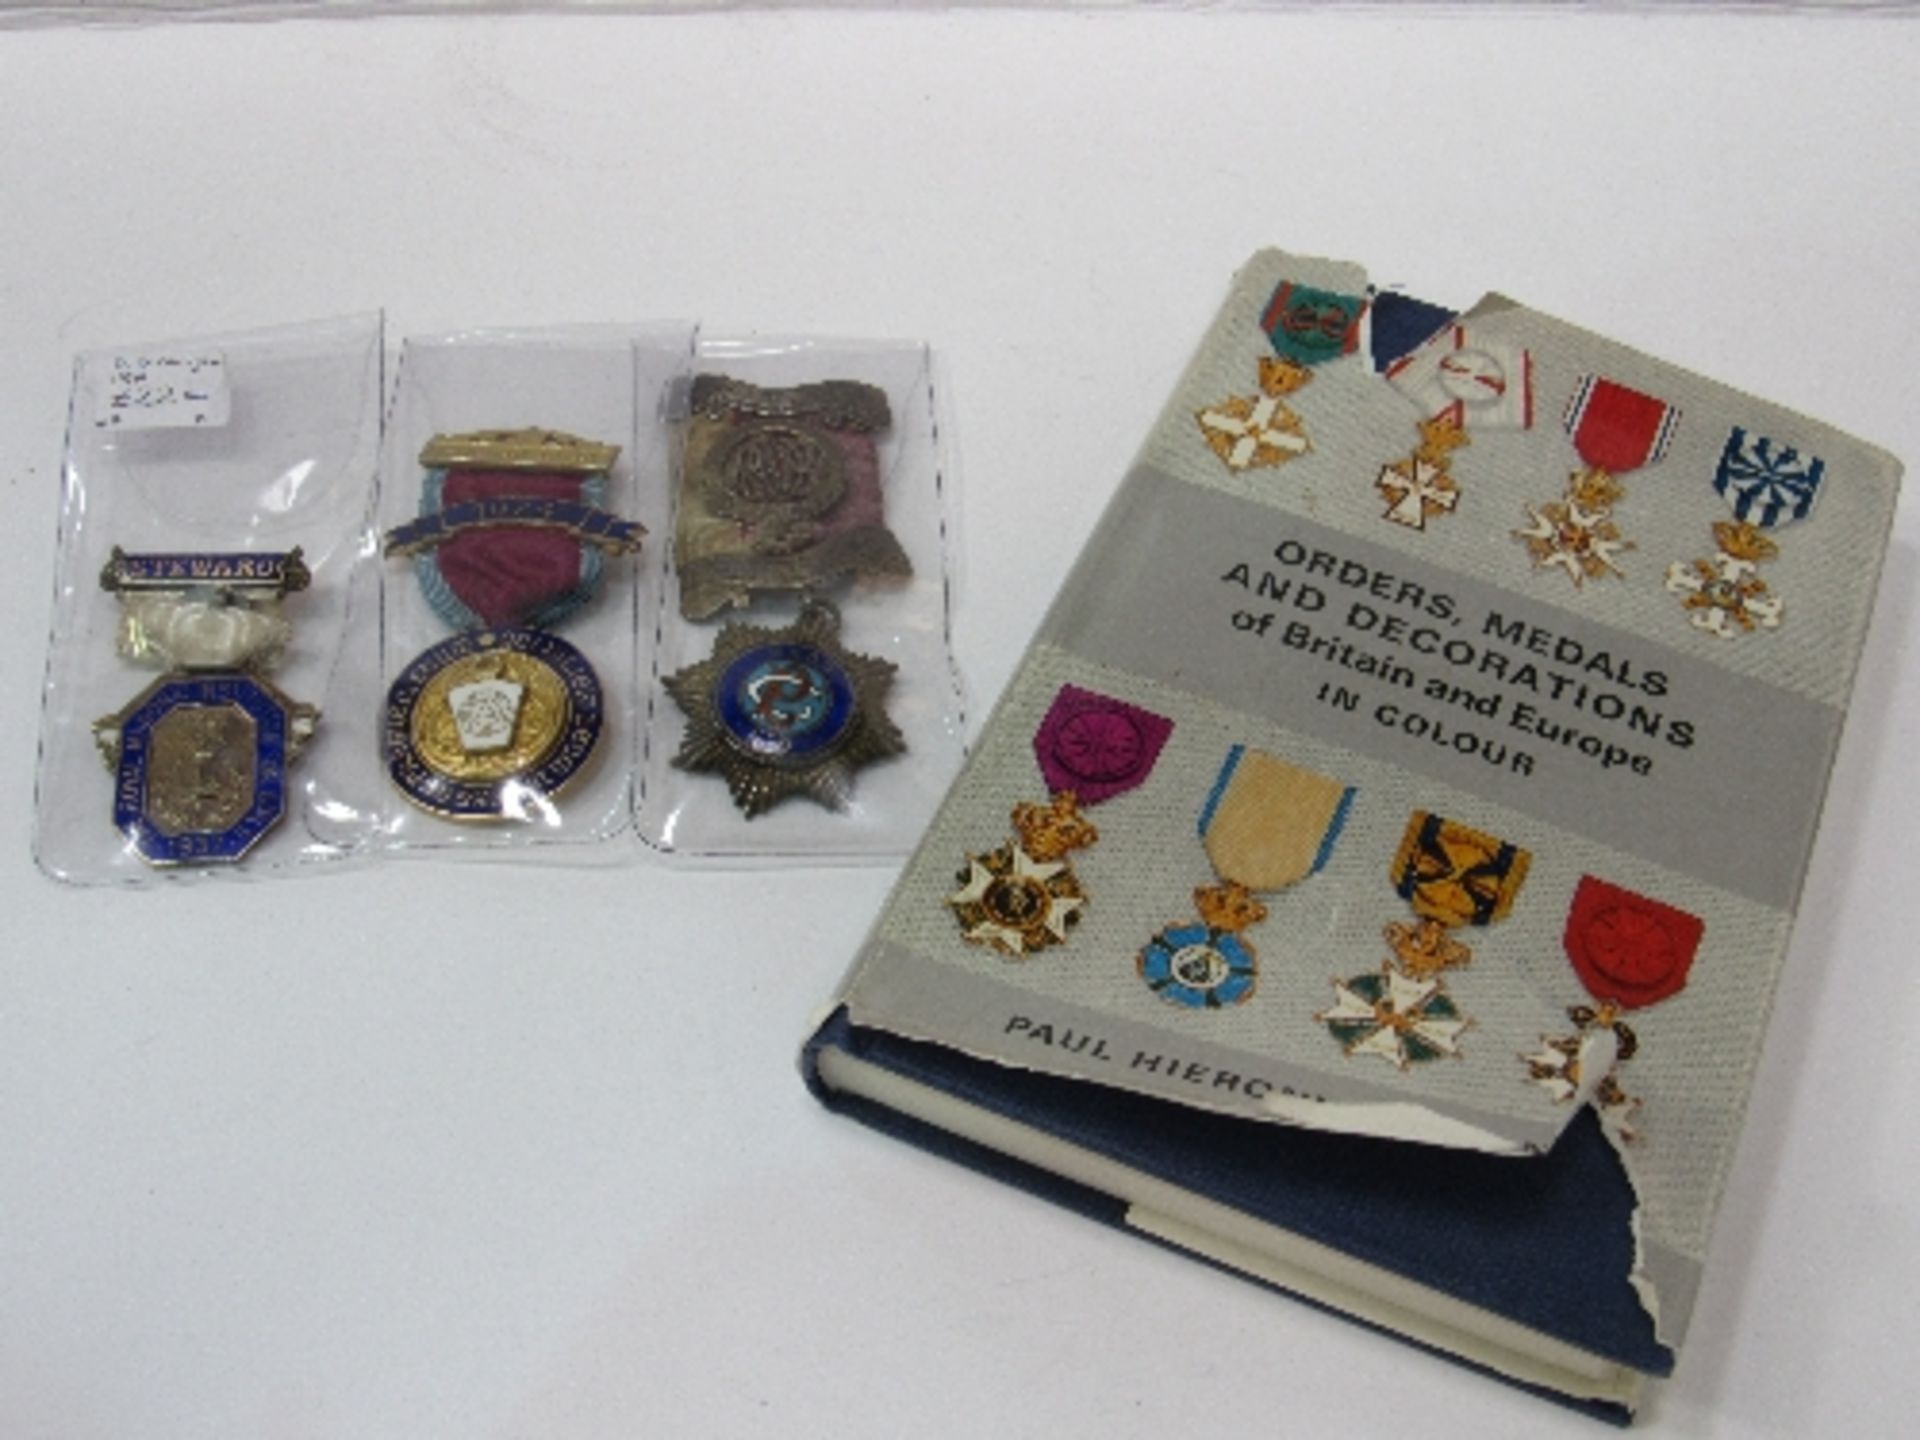 3 sterling silver Masonic medals together with a book on European Orders, medals & decorations.